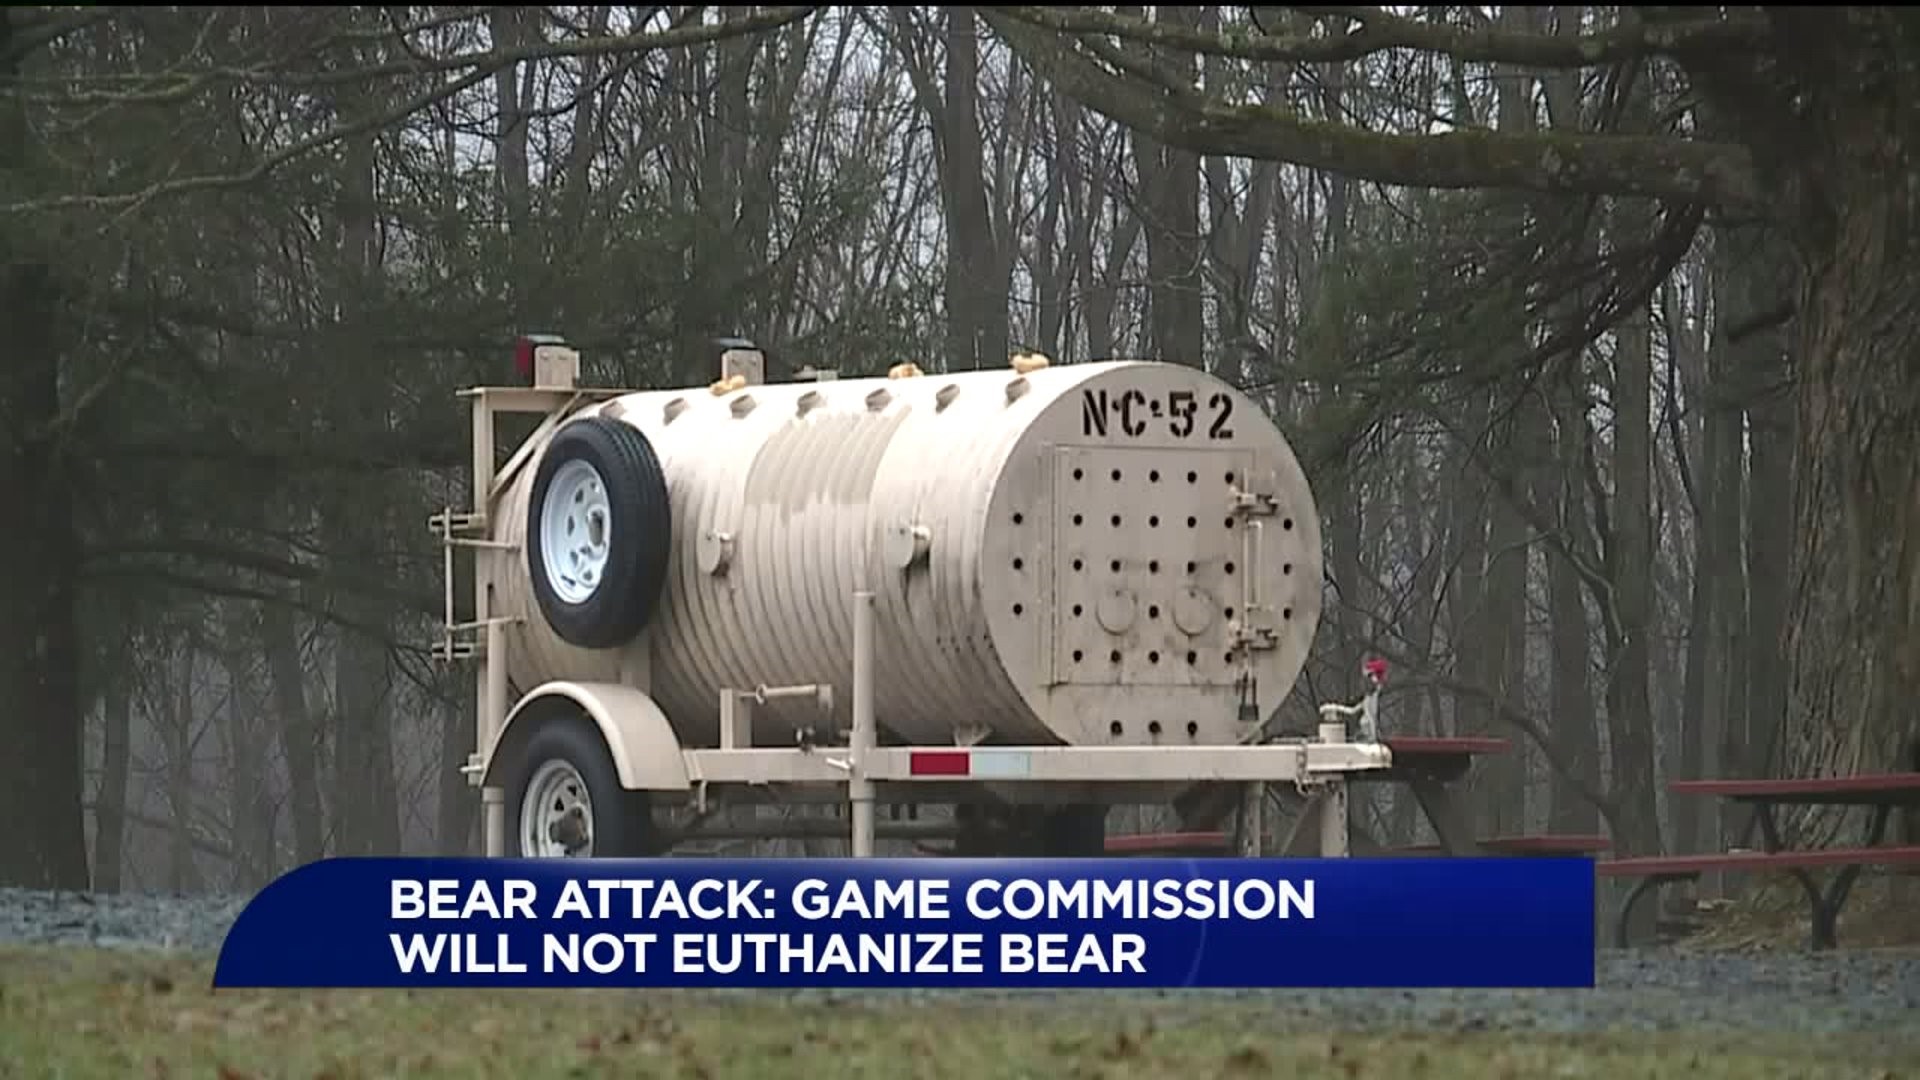 Game Commission Will Not Euthanize Bear in Lycoming County Attack